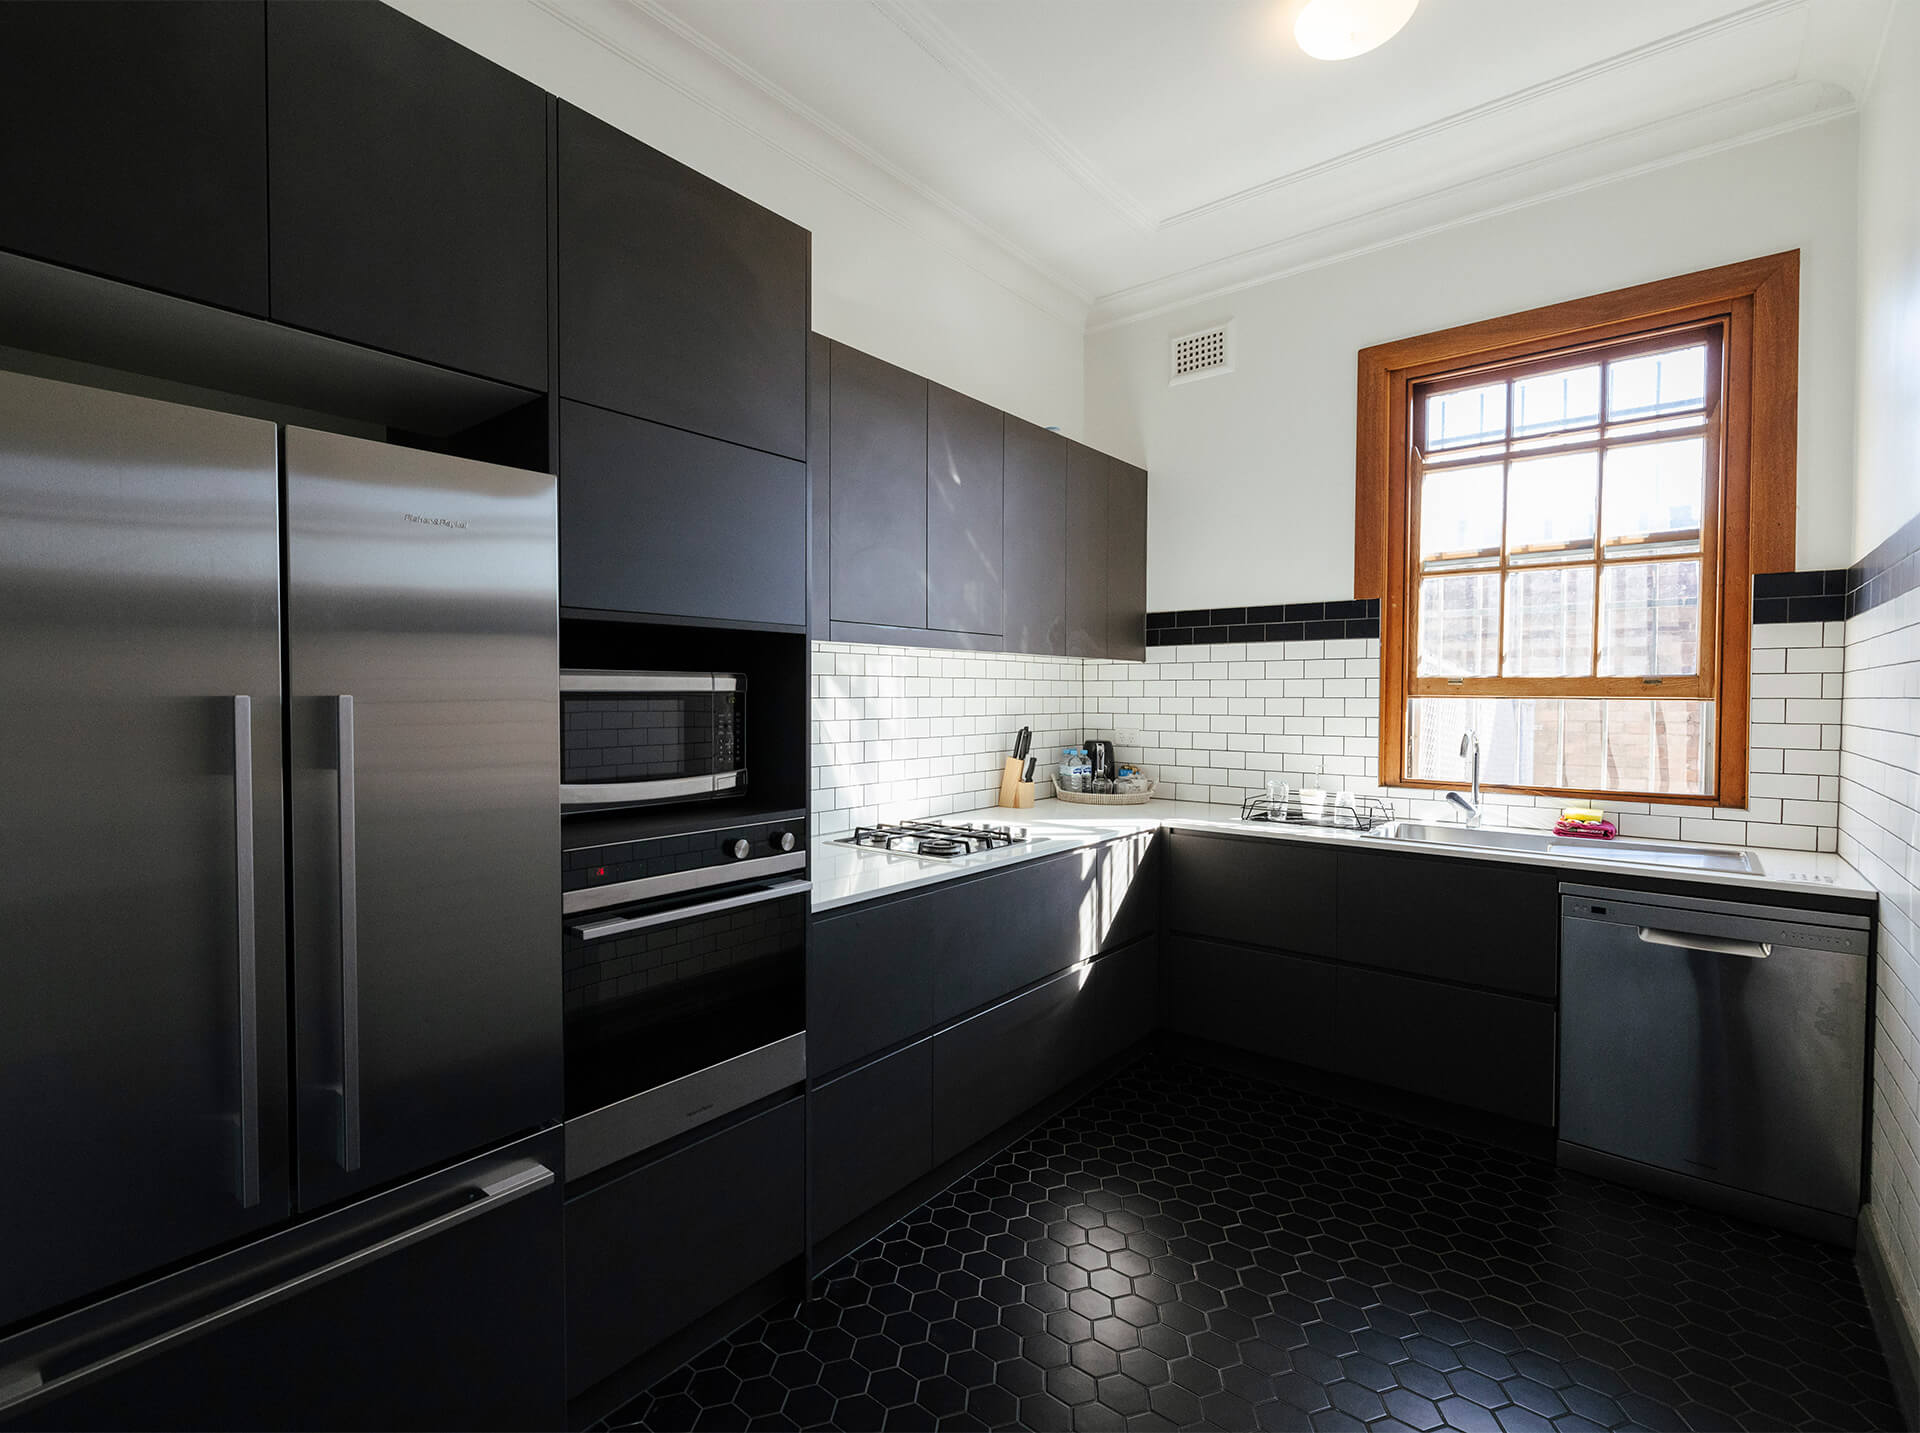 A modern kitchen with sleek black cabinets and shiny stainless steel appliances in a Guildford hotel apartment.